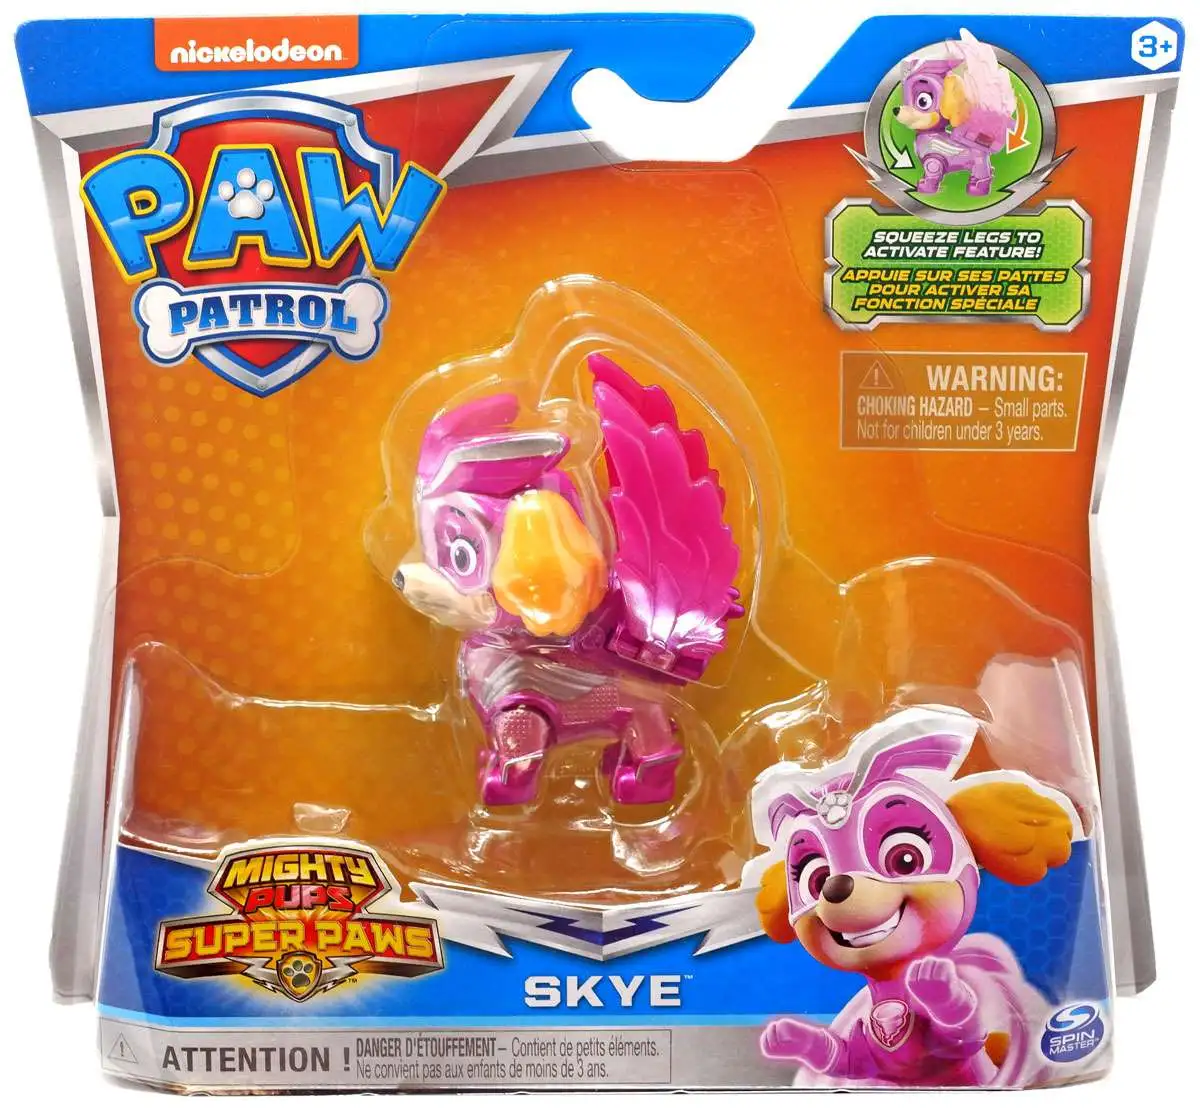 Nickelodeon Paw Patrol Mighty Pups Super Paws Skye "NEW" 